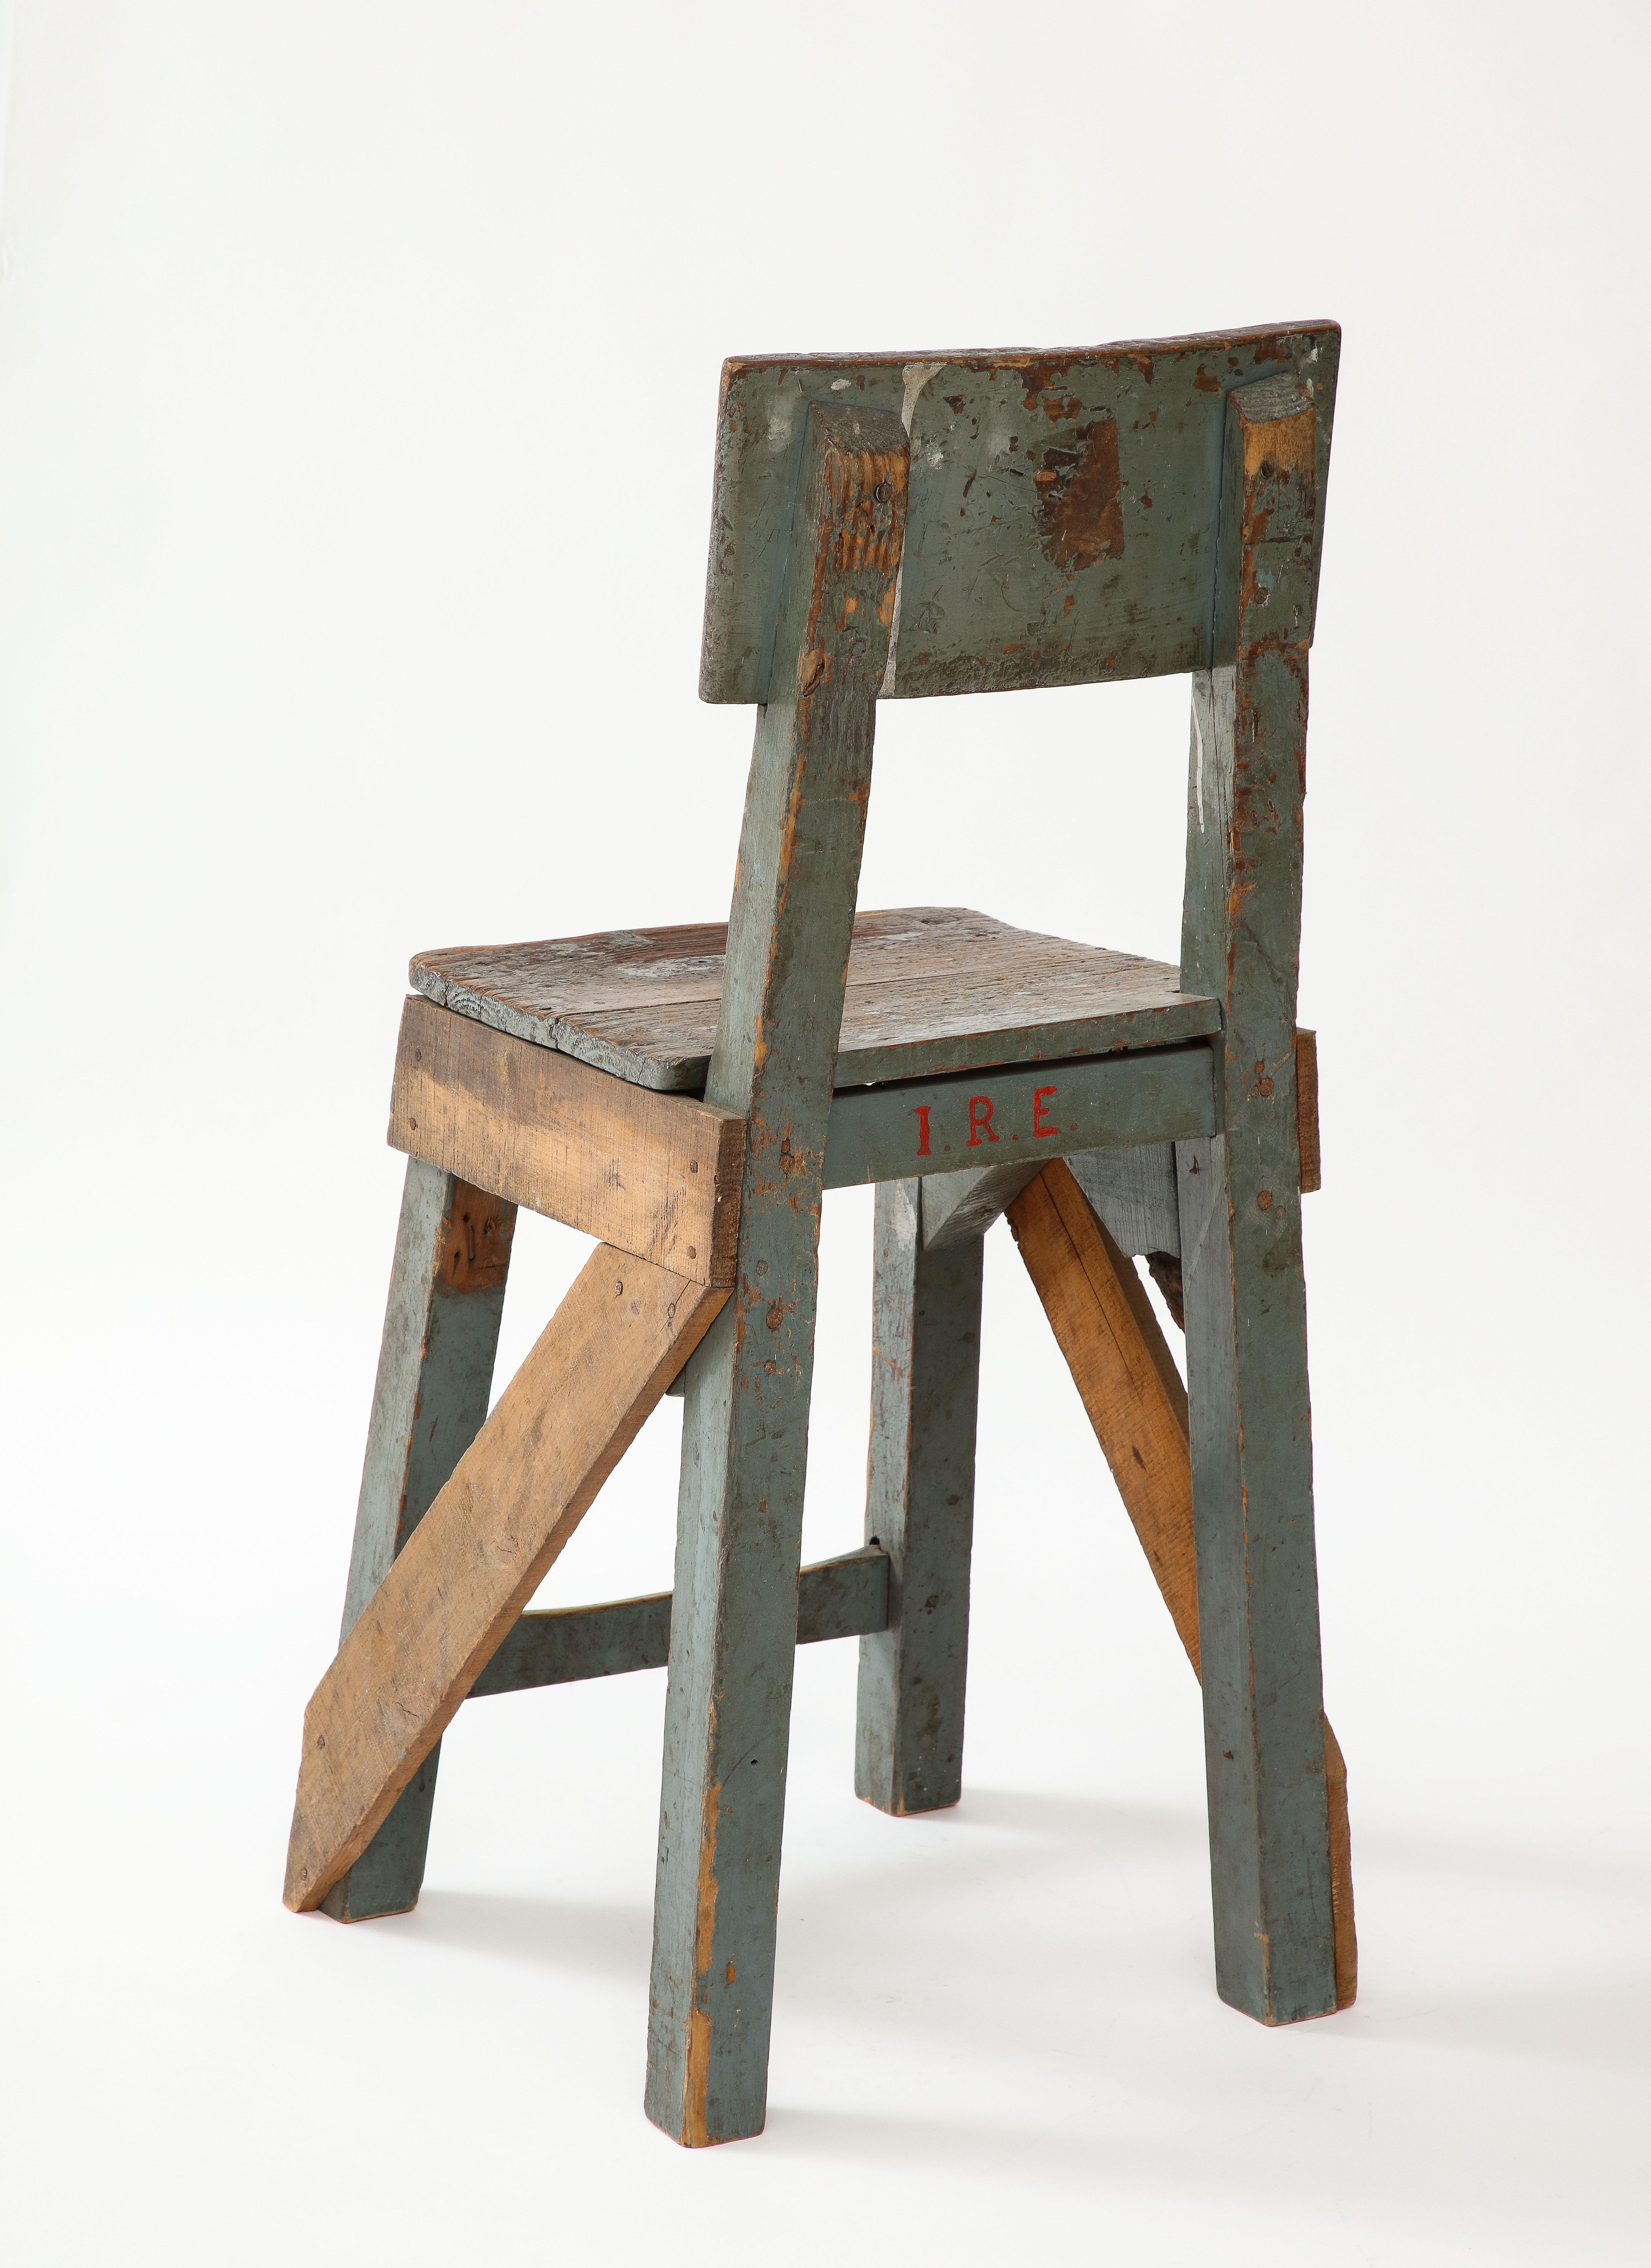 French Primitive Artist’s Chair, c. 1950 For Sale 2